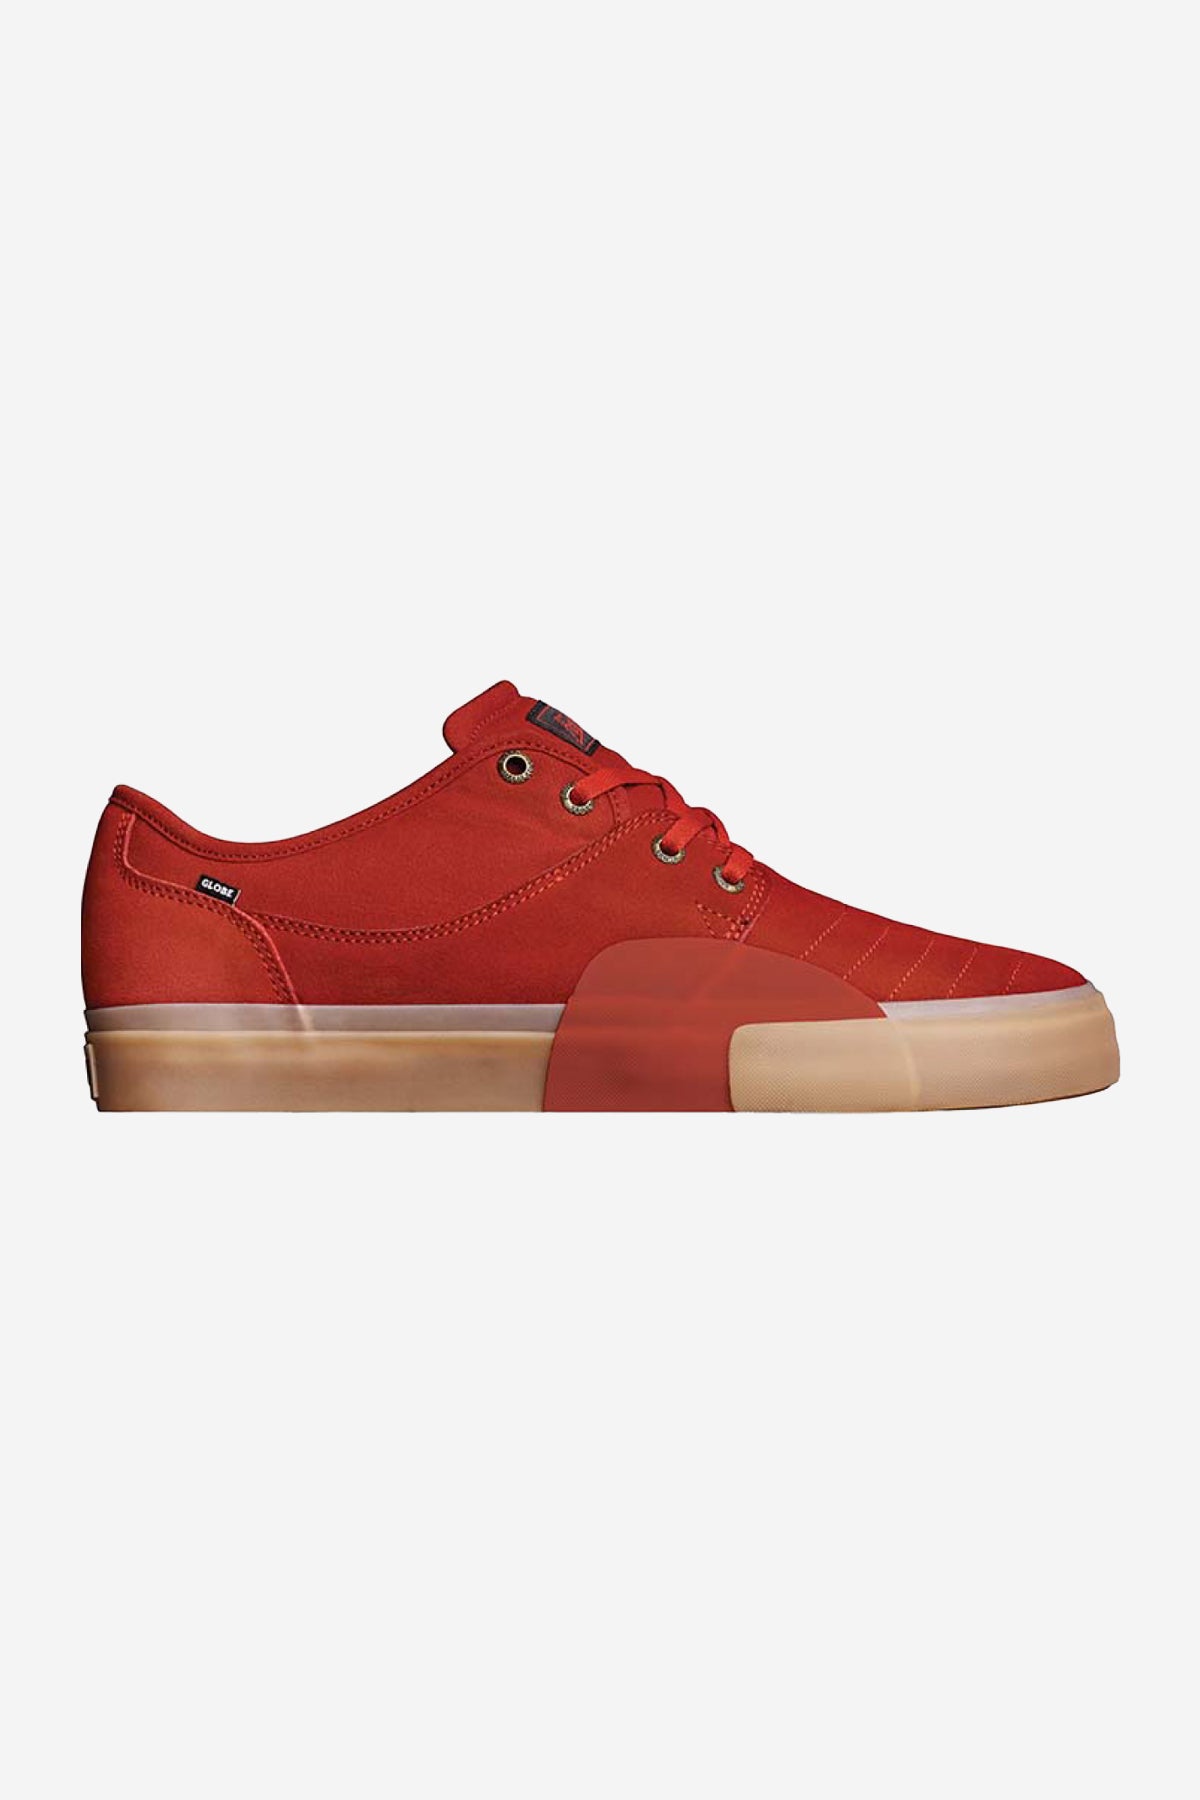 Mahalo Plus Red/Gum skate shoes